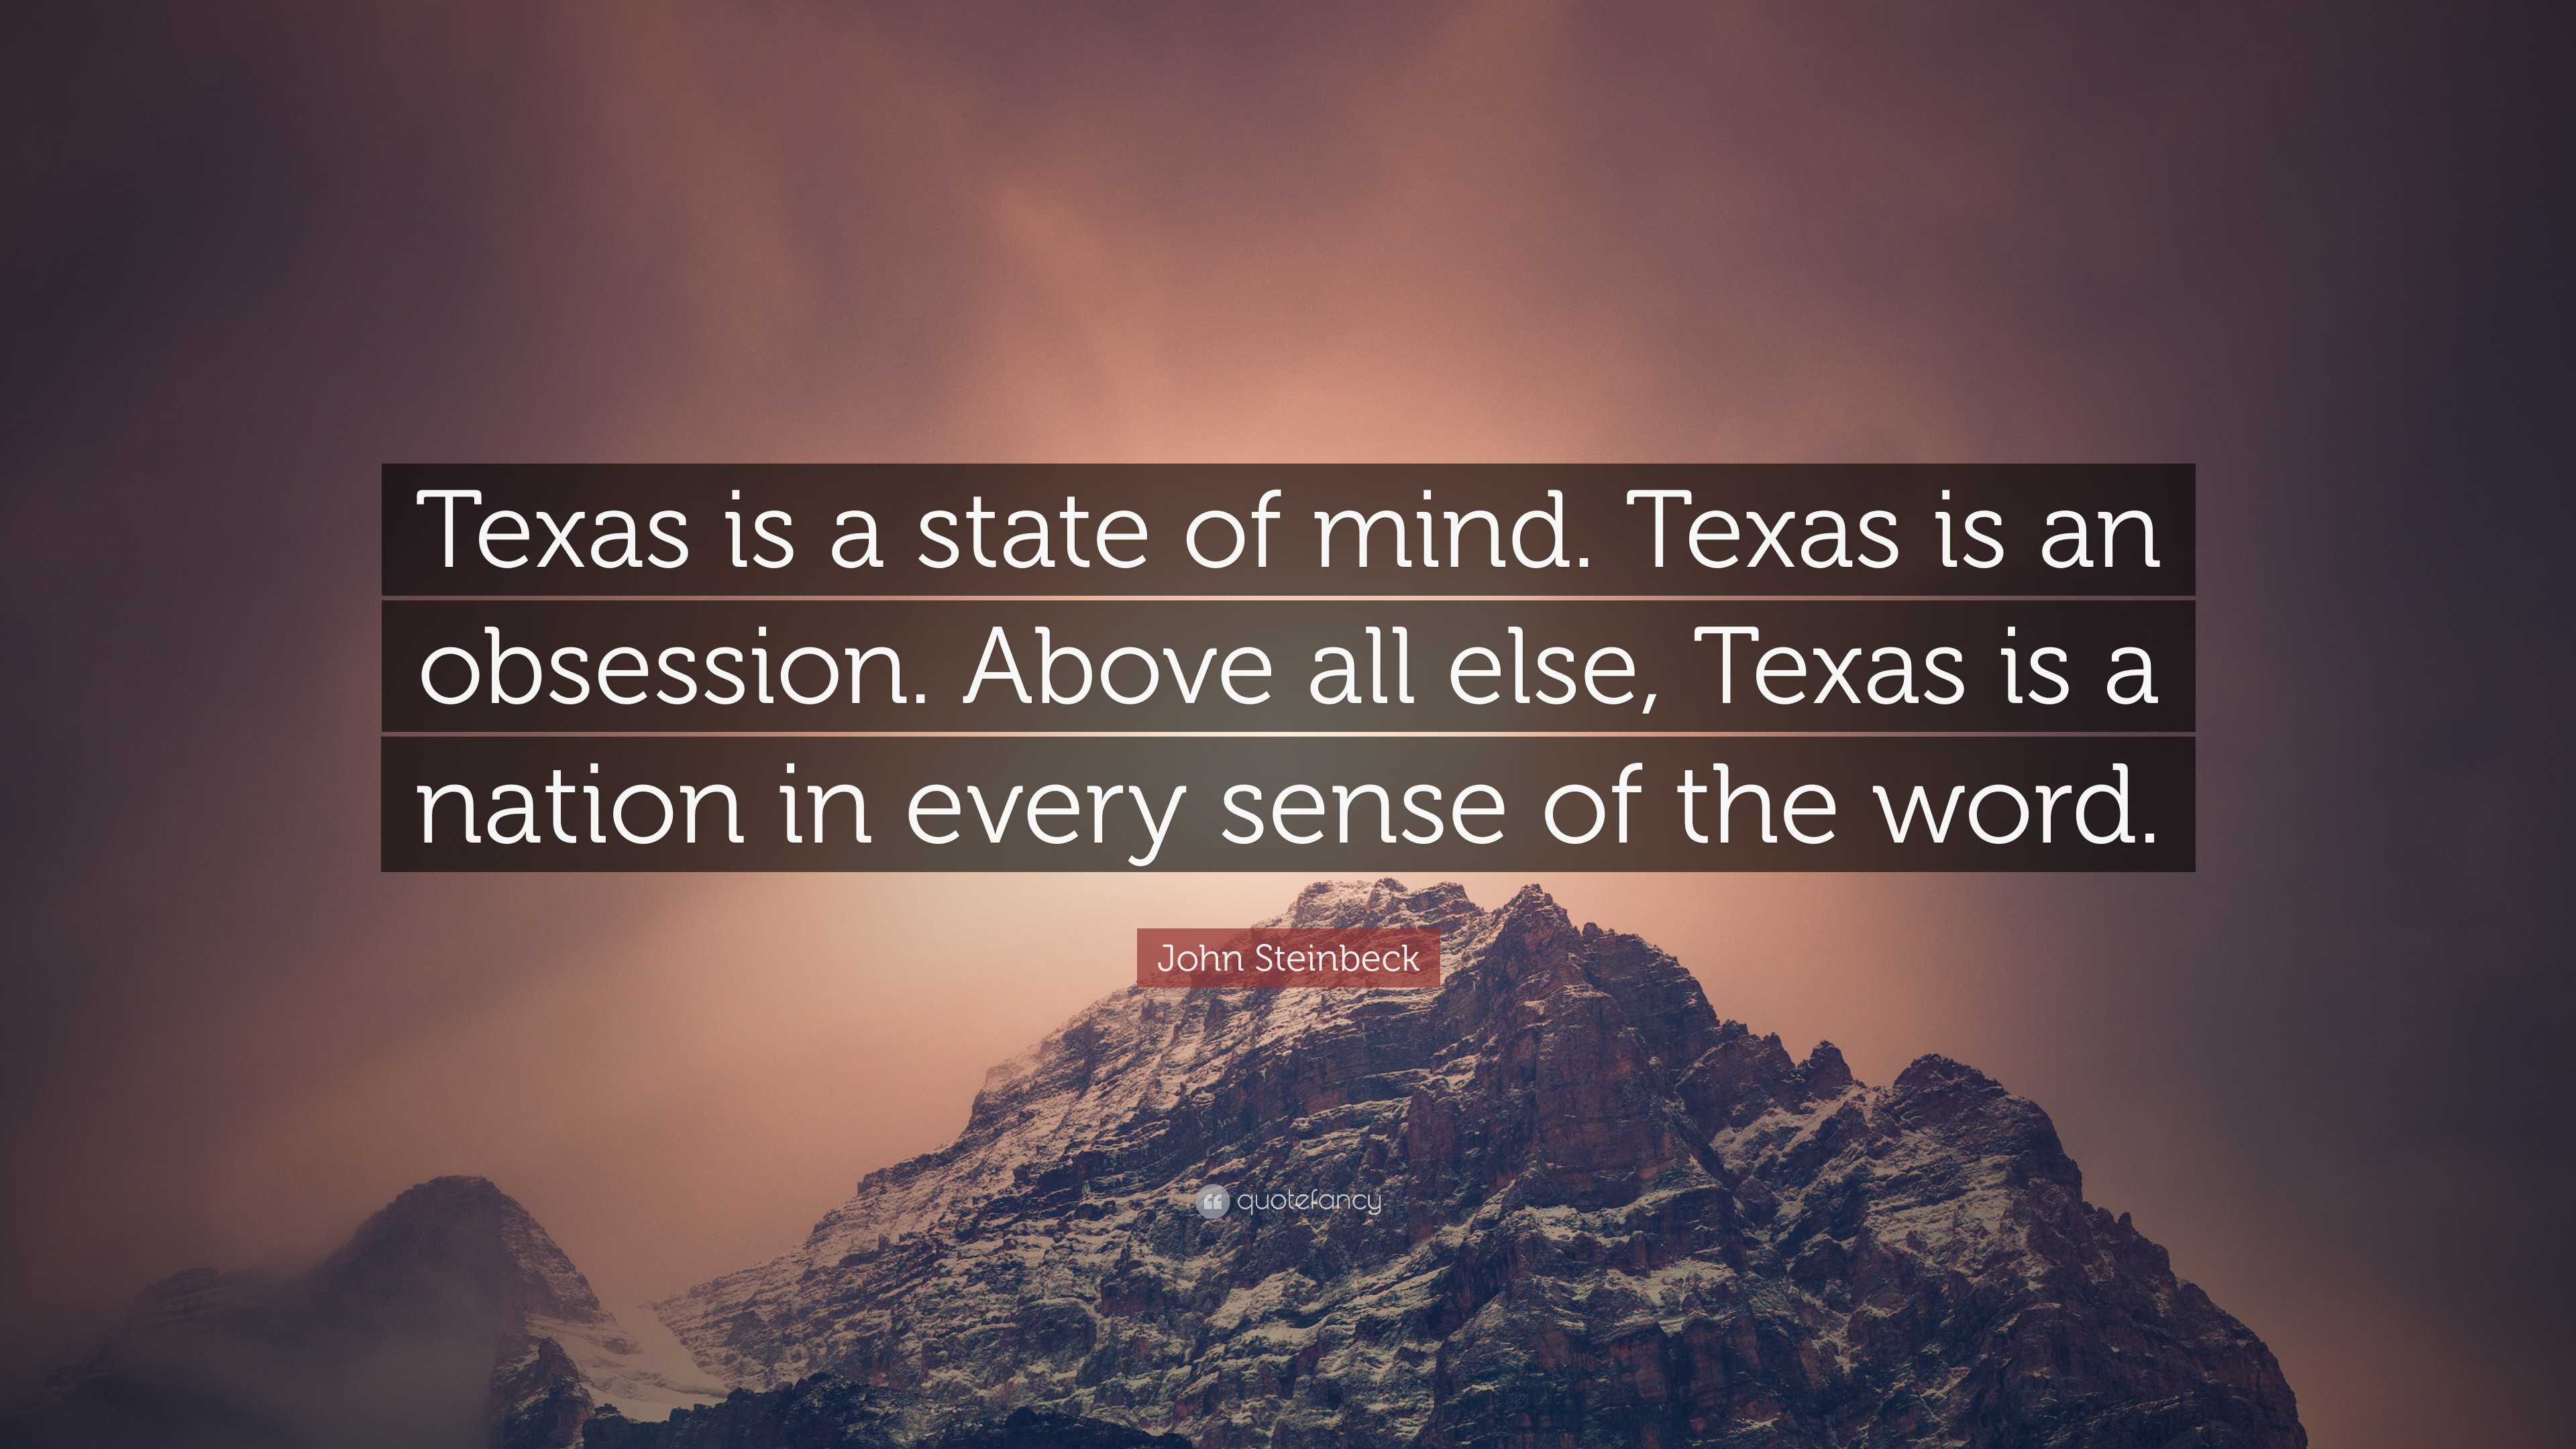 7908308-John-Steinbeck-Quote-Texas-is-a-state-of-mind-Texas-is-an.jpg